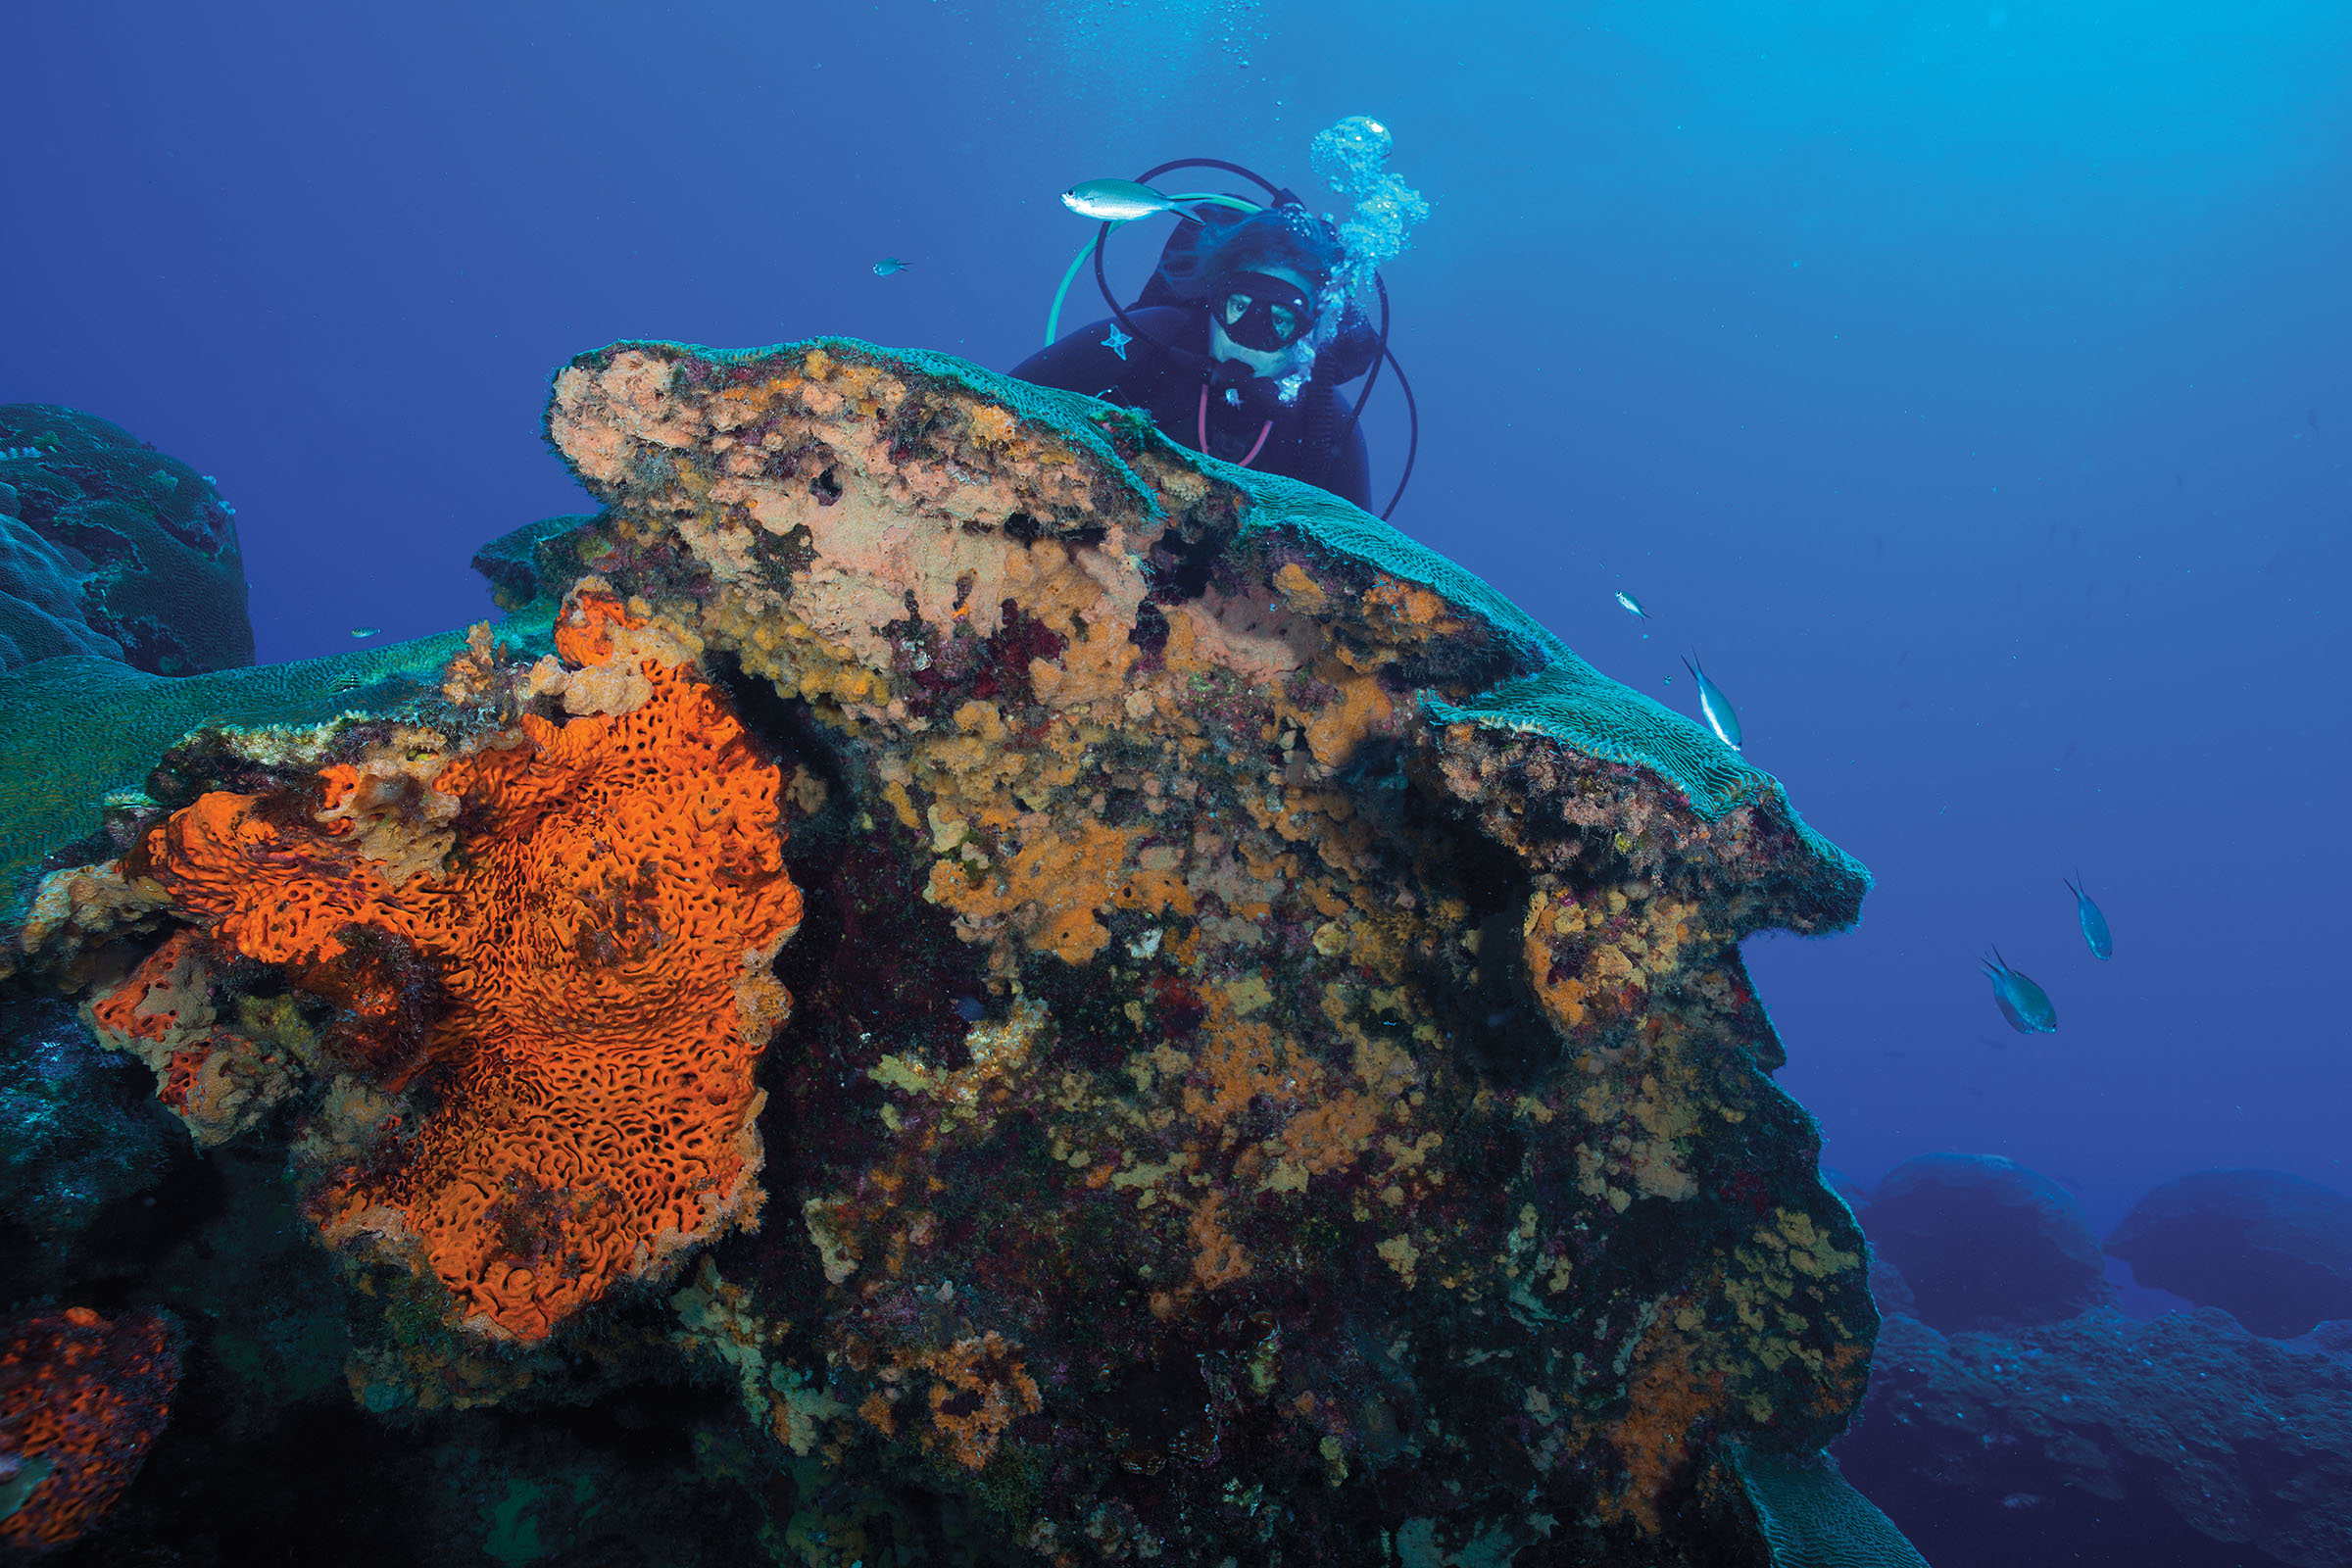 A picture of a scuba diver exhaling bubbles behind a brightly colored, red orange and blue piece of rock deep in blue water